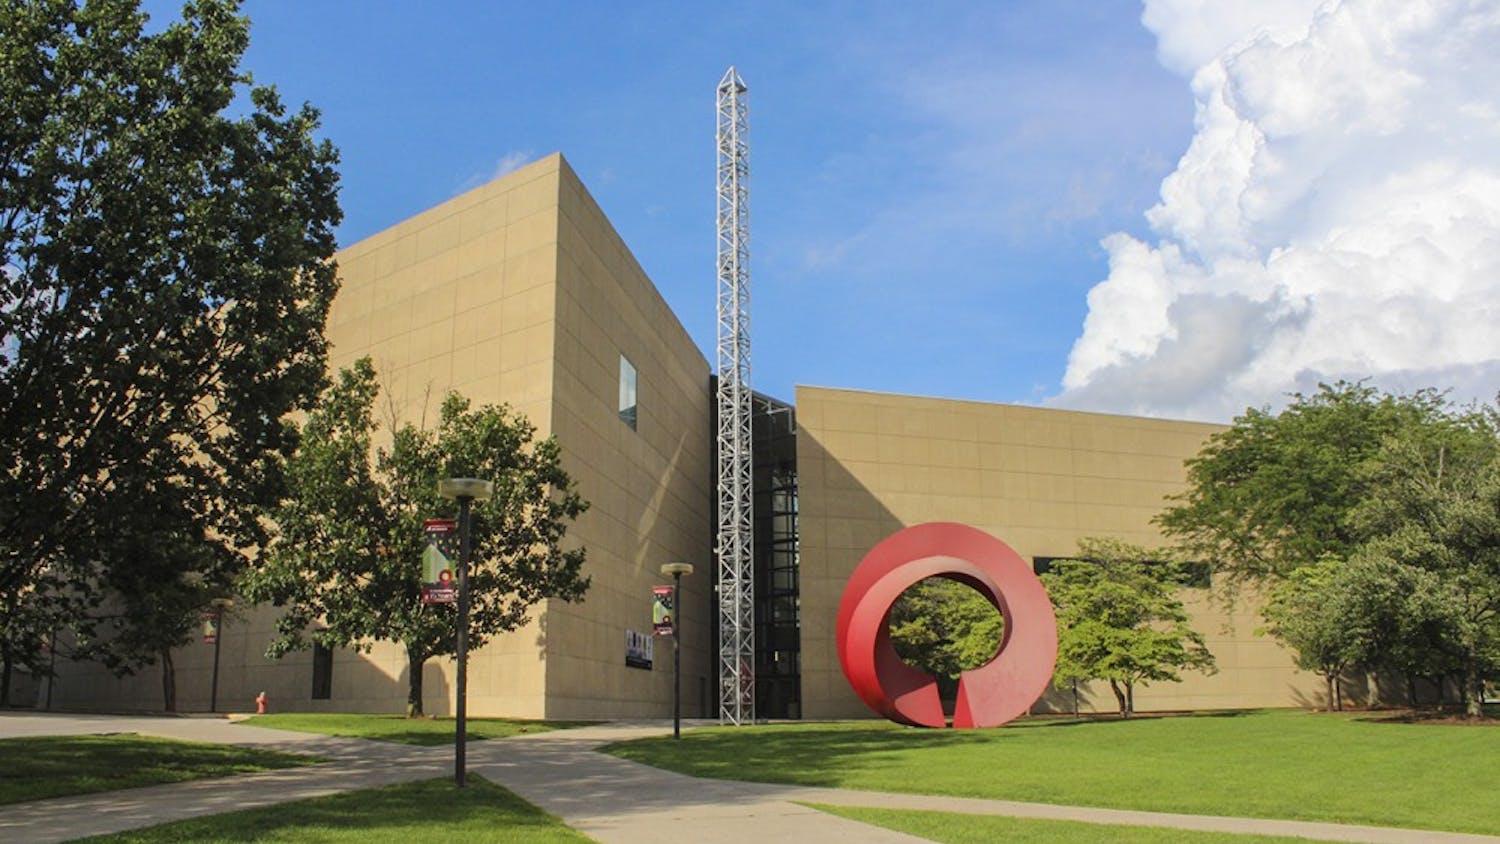 This is the IU Art Museum. It hosts many exhibits and special events throughout the year. 